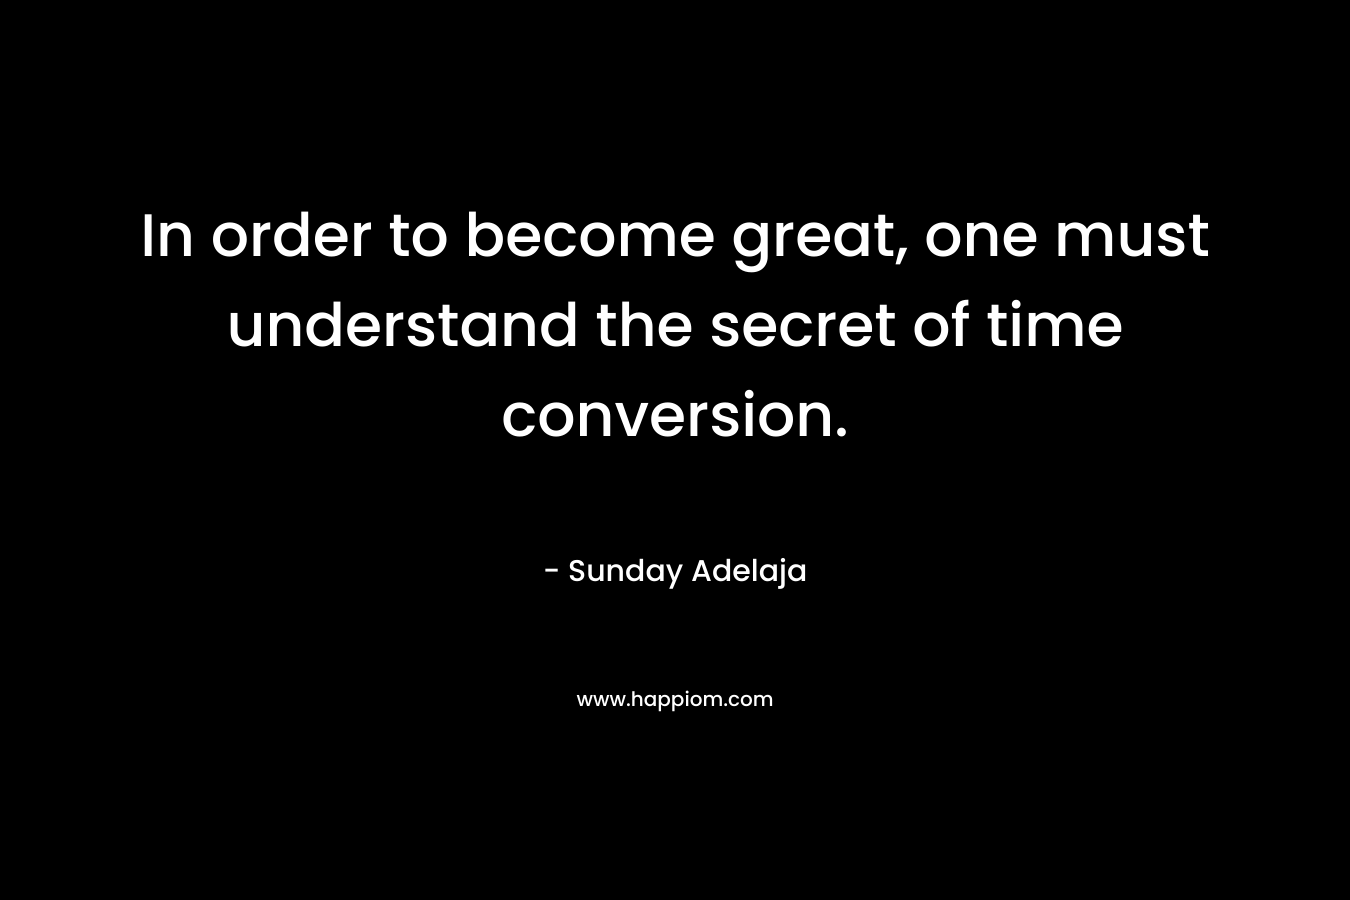 In order to become great, one must understand the secret of time conversion.